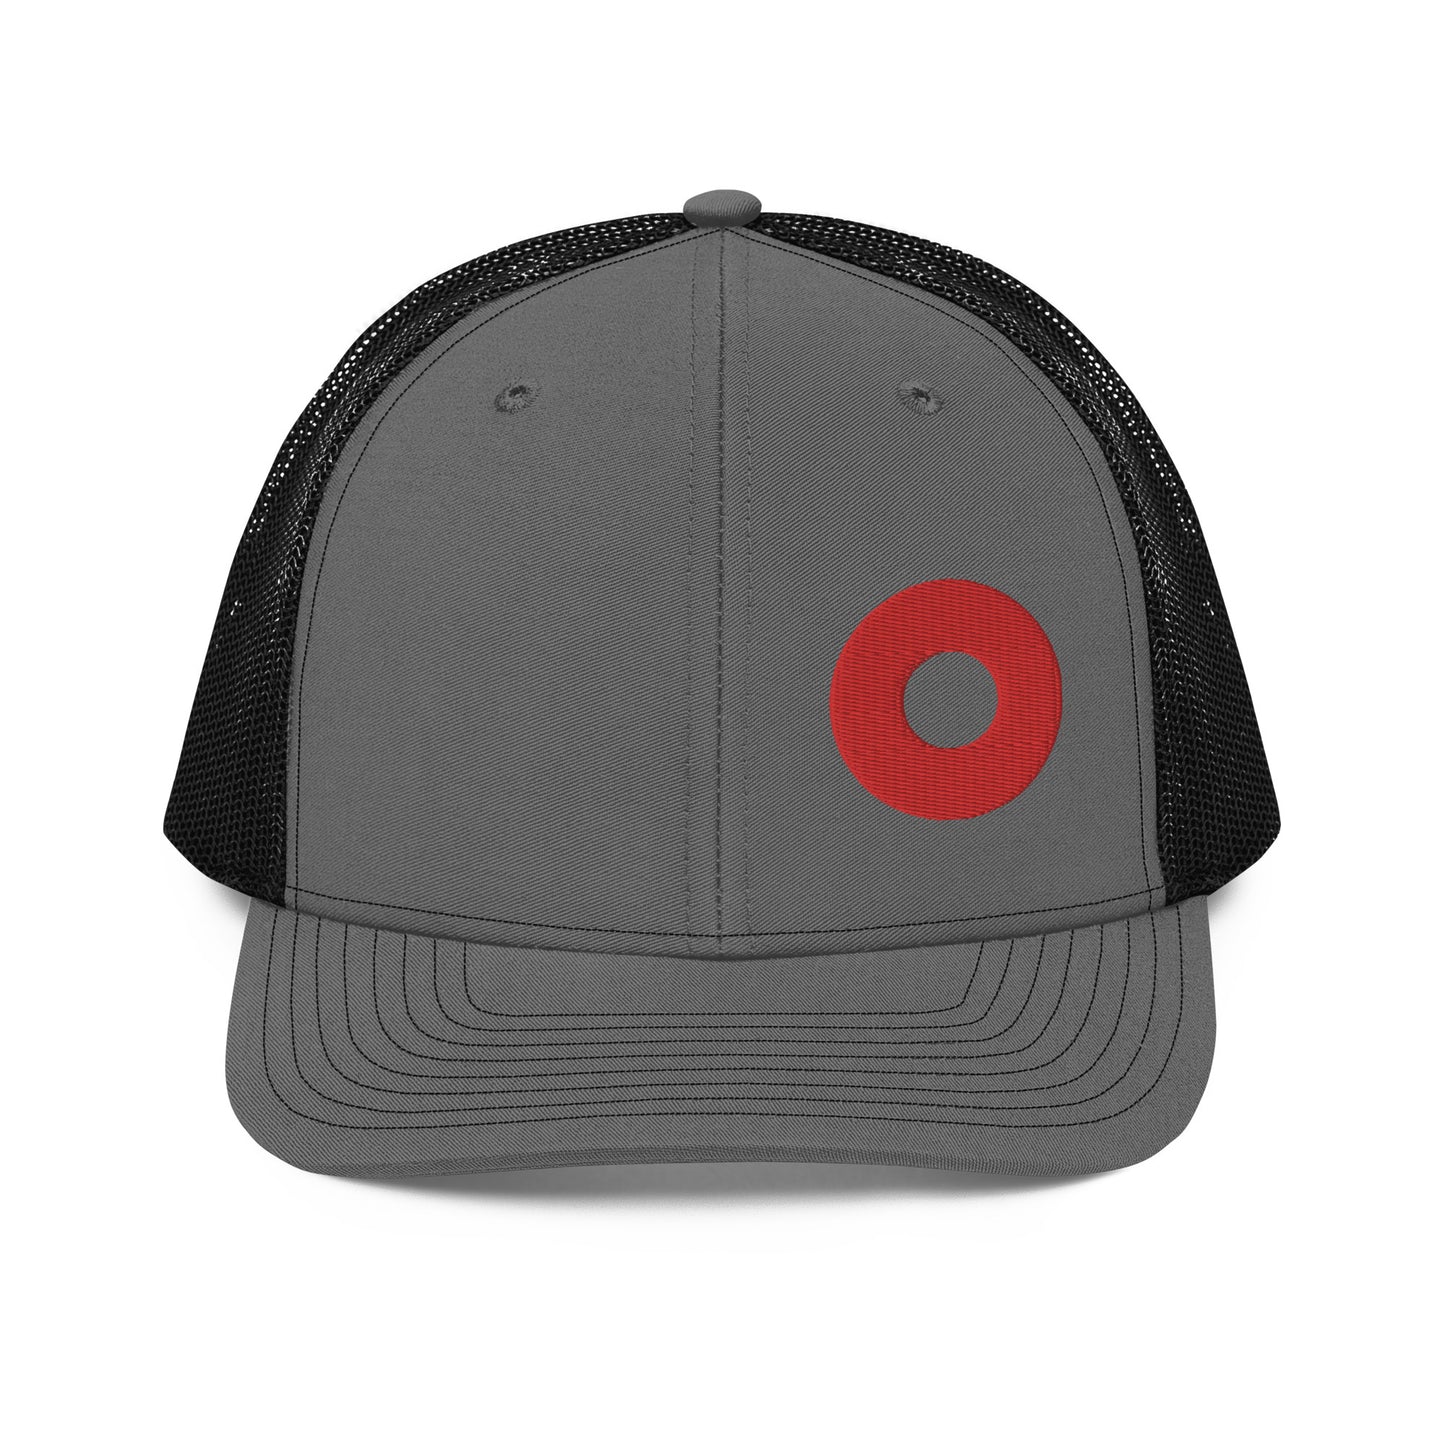 Red Donut Off Center Embroidery 112 Snapback Cap